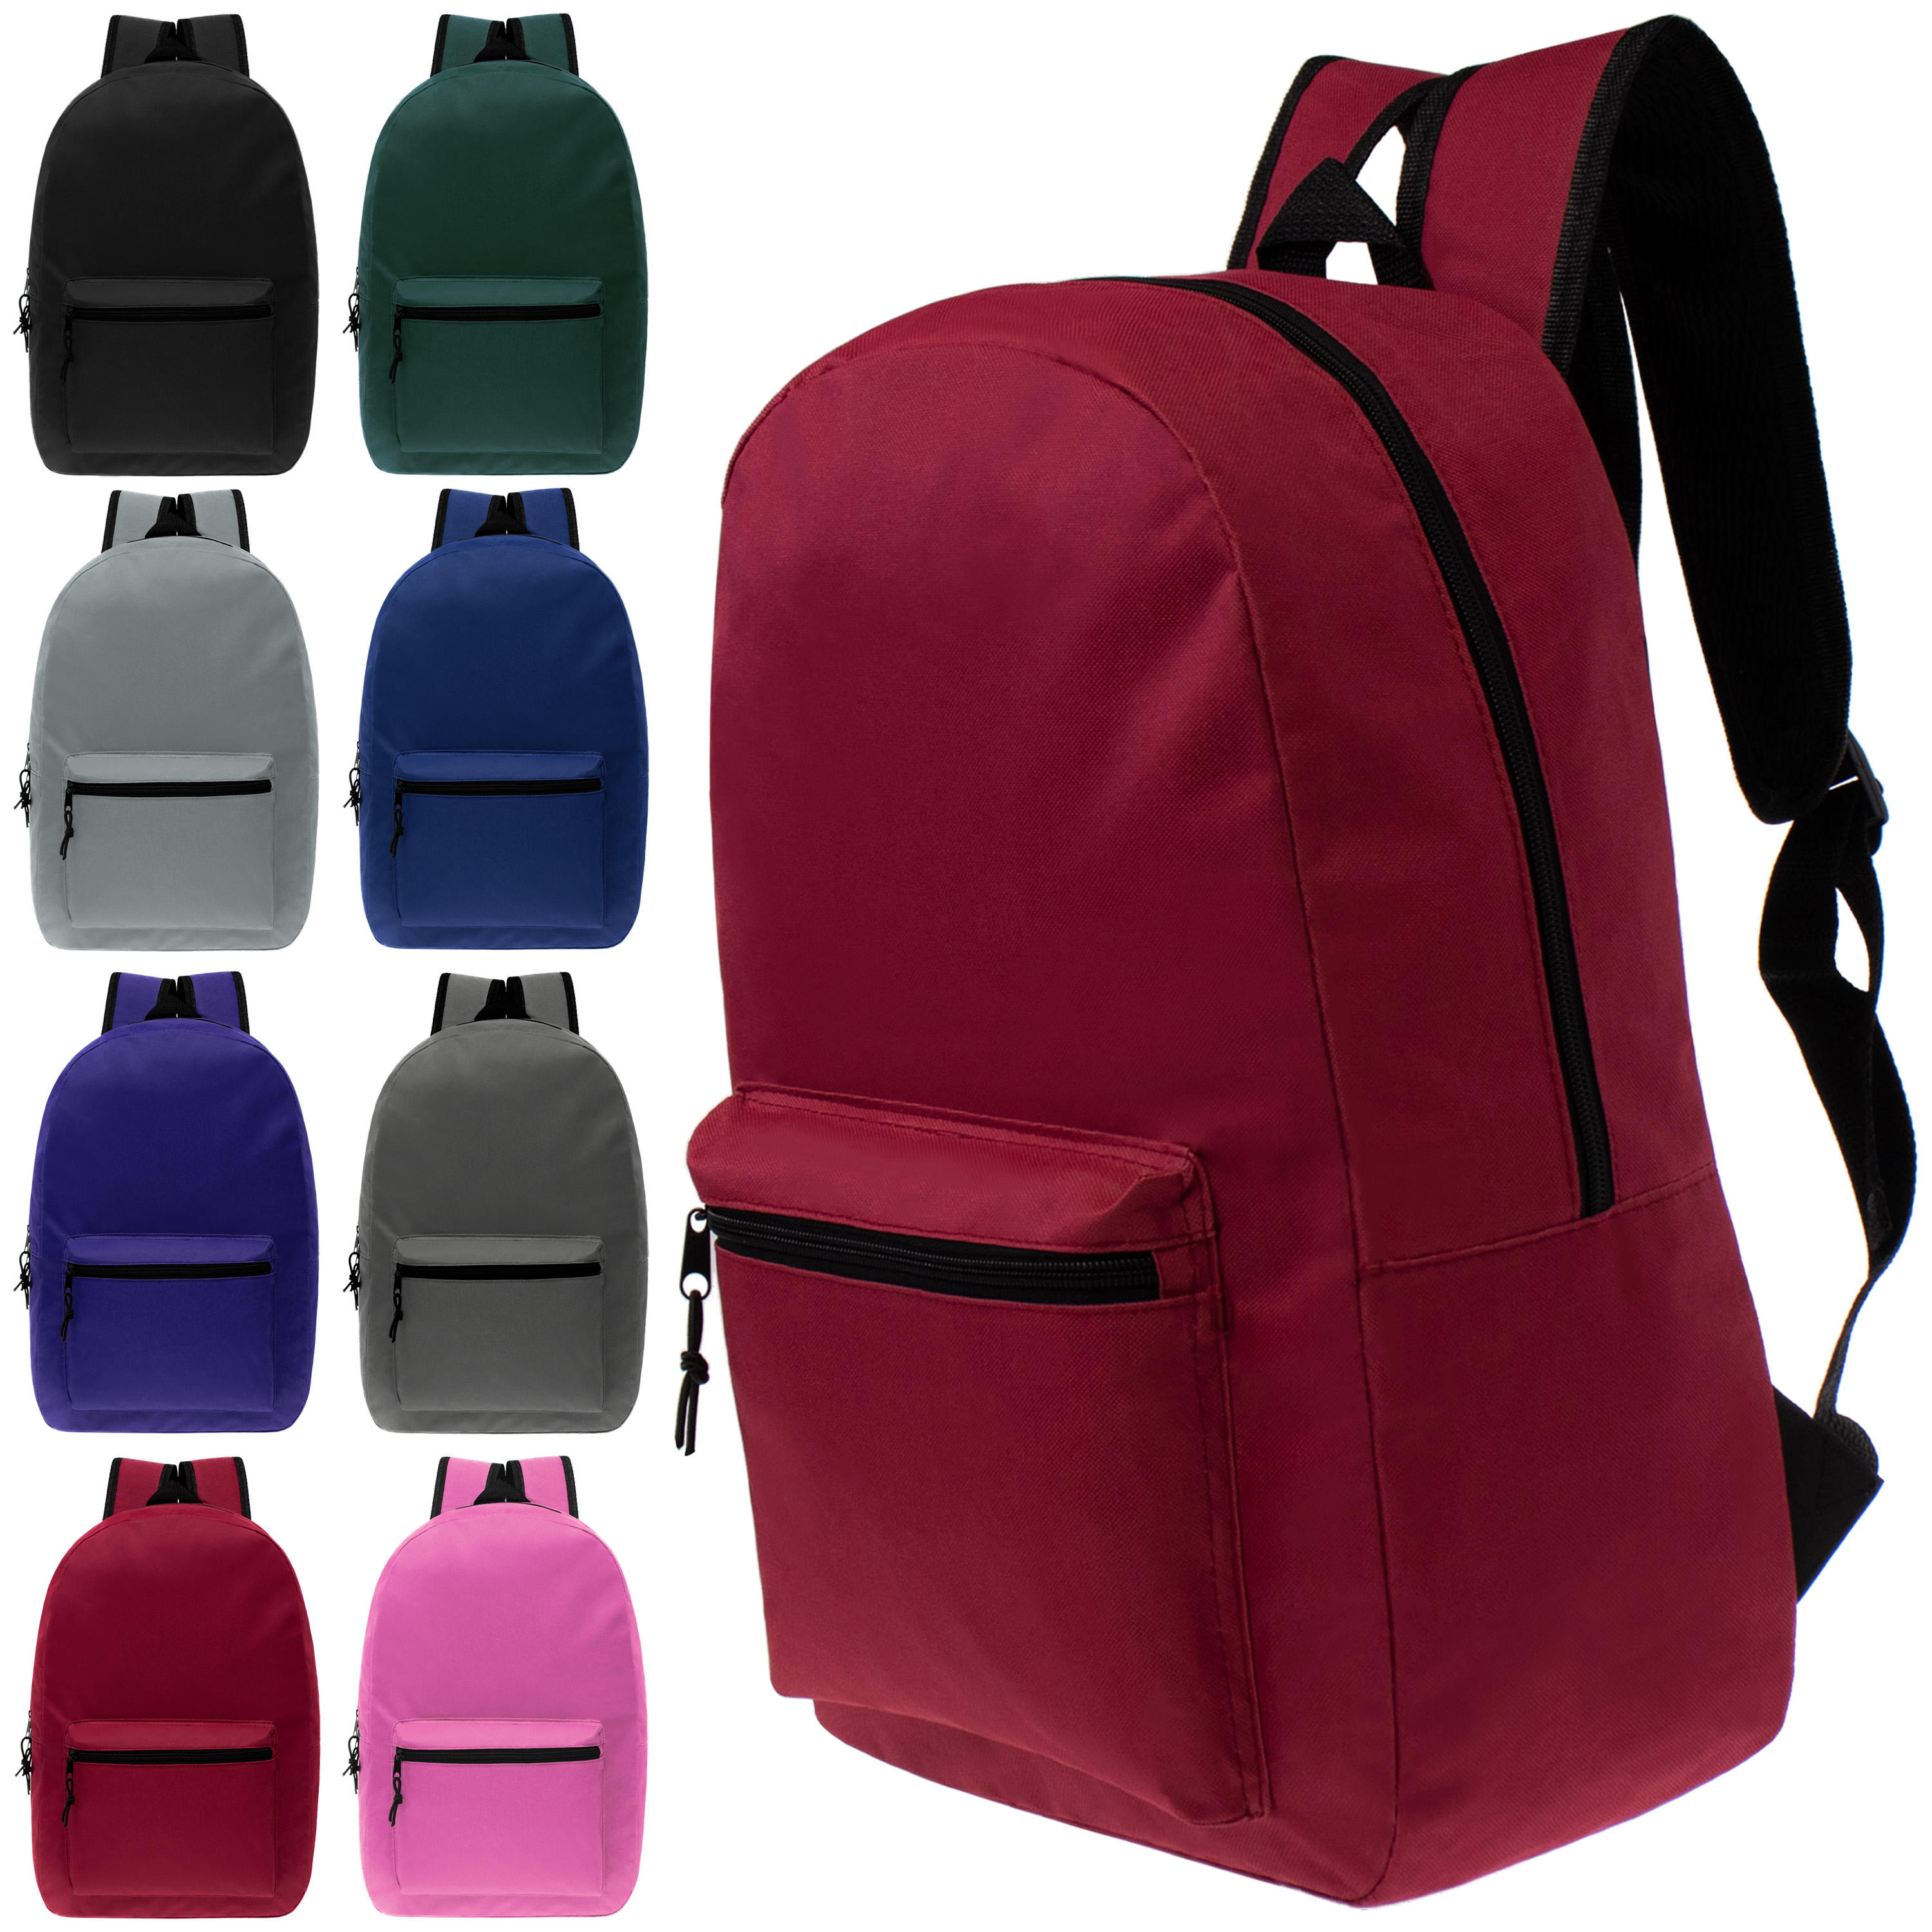 ''15'''' Lightweight Classic Style BACKPACKs w/ Adjustable Padded Straps - Pastel & Assorted Colors''